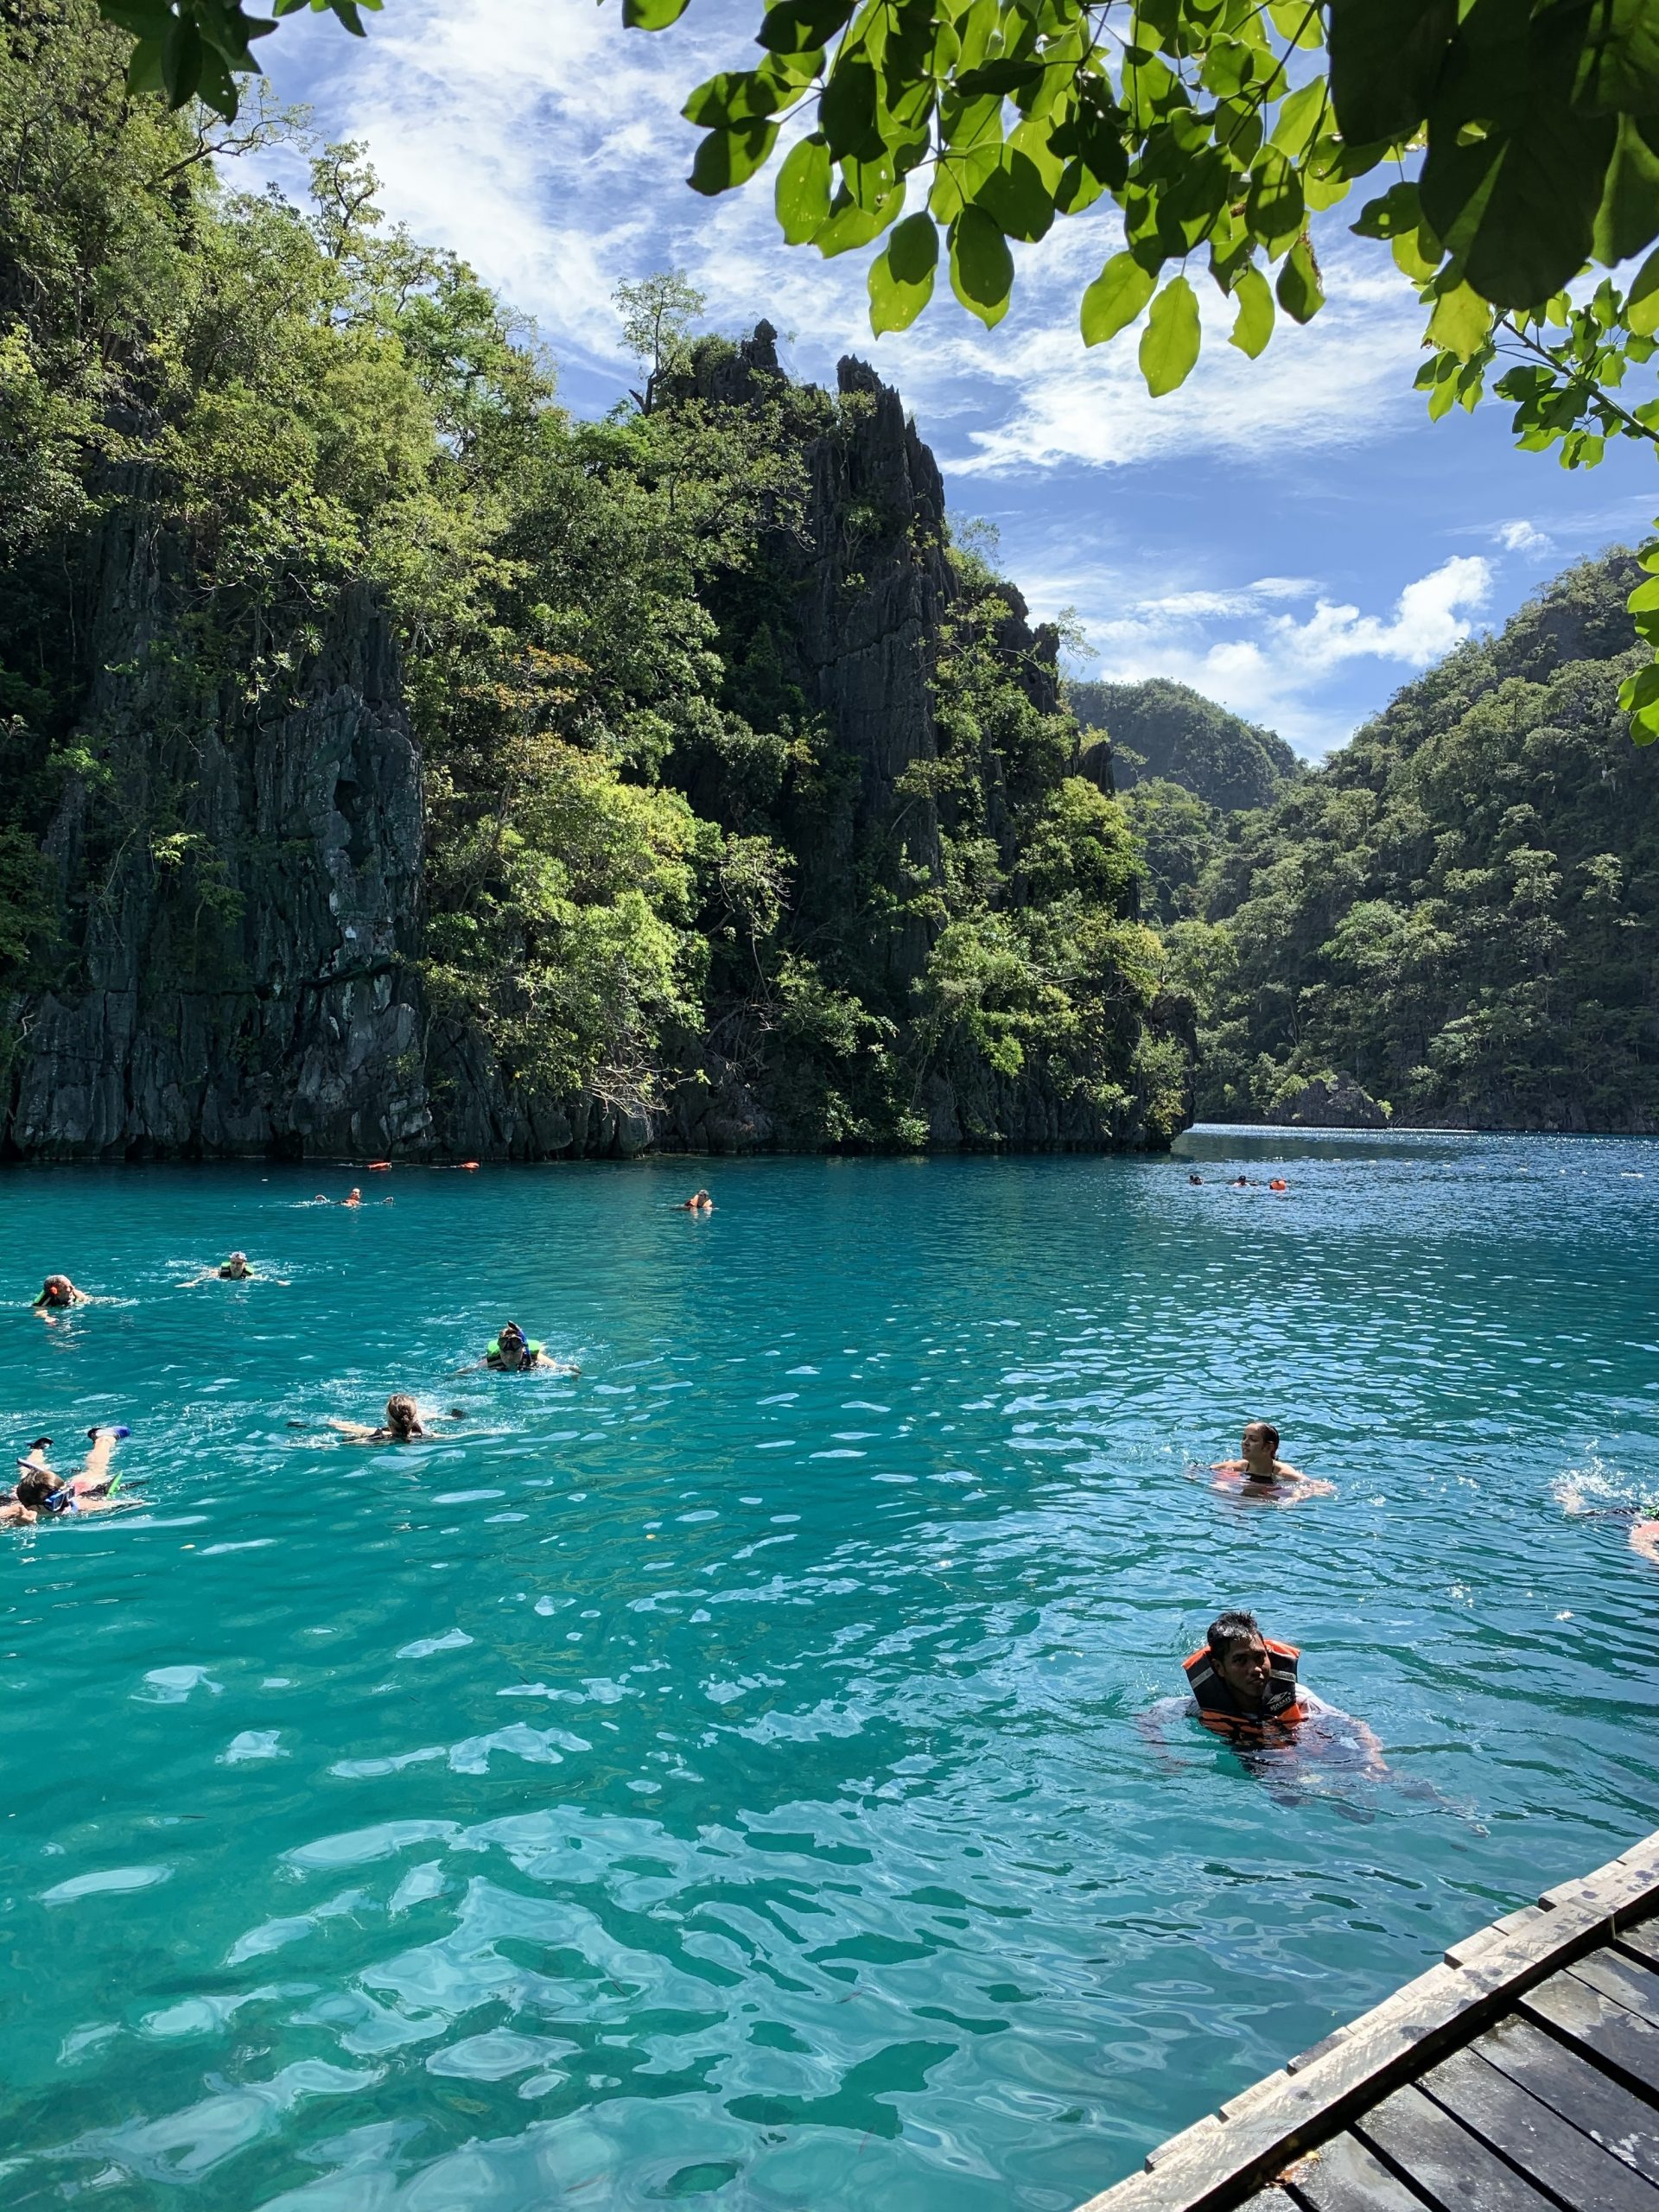 What To Do In Coron - A 4 Days In Coron Itinerary